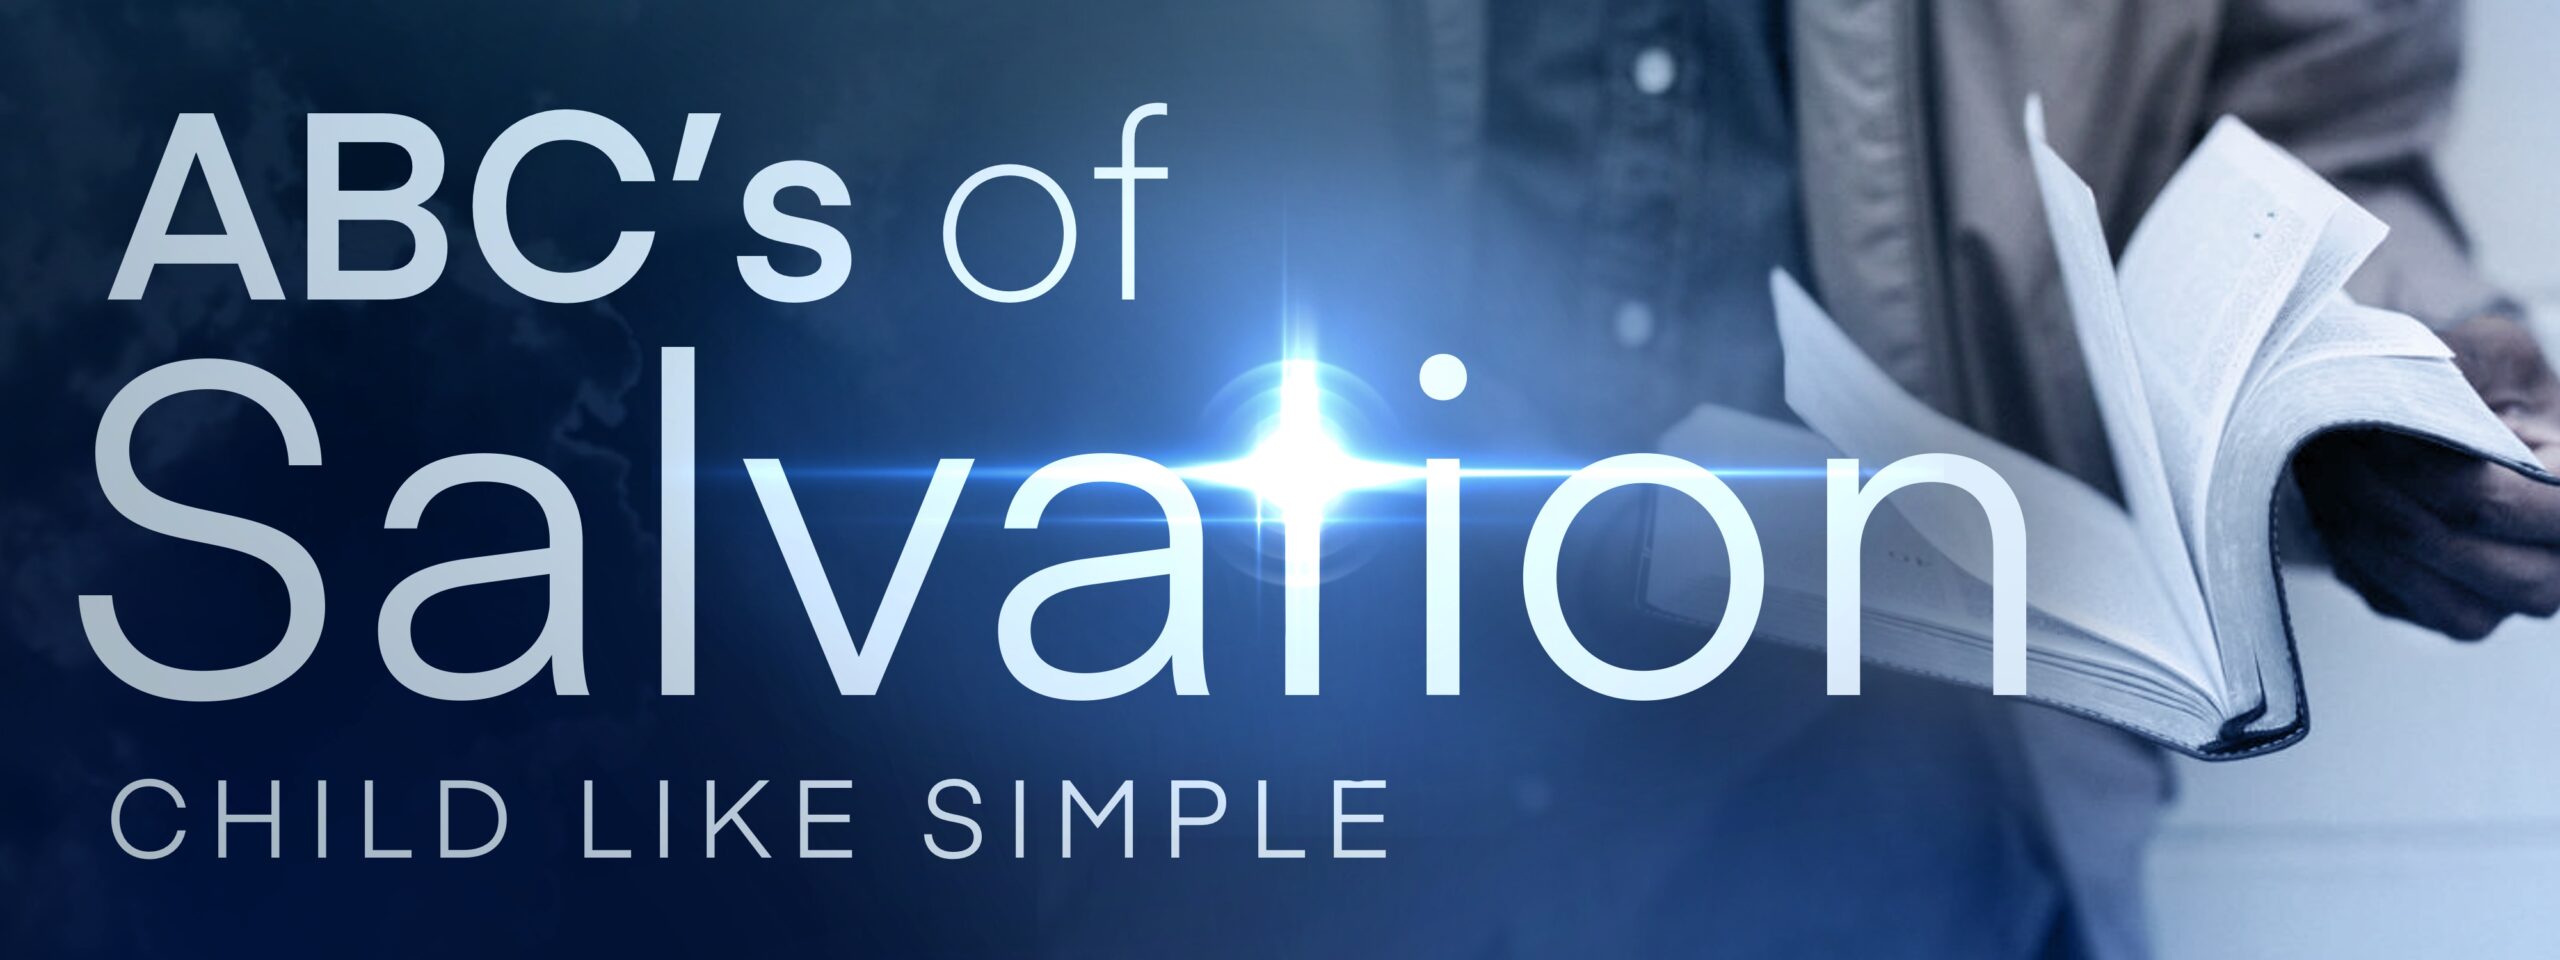 ABC's of Salvation